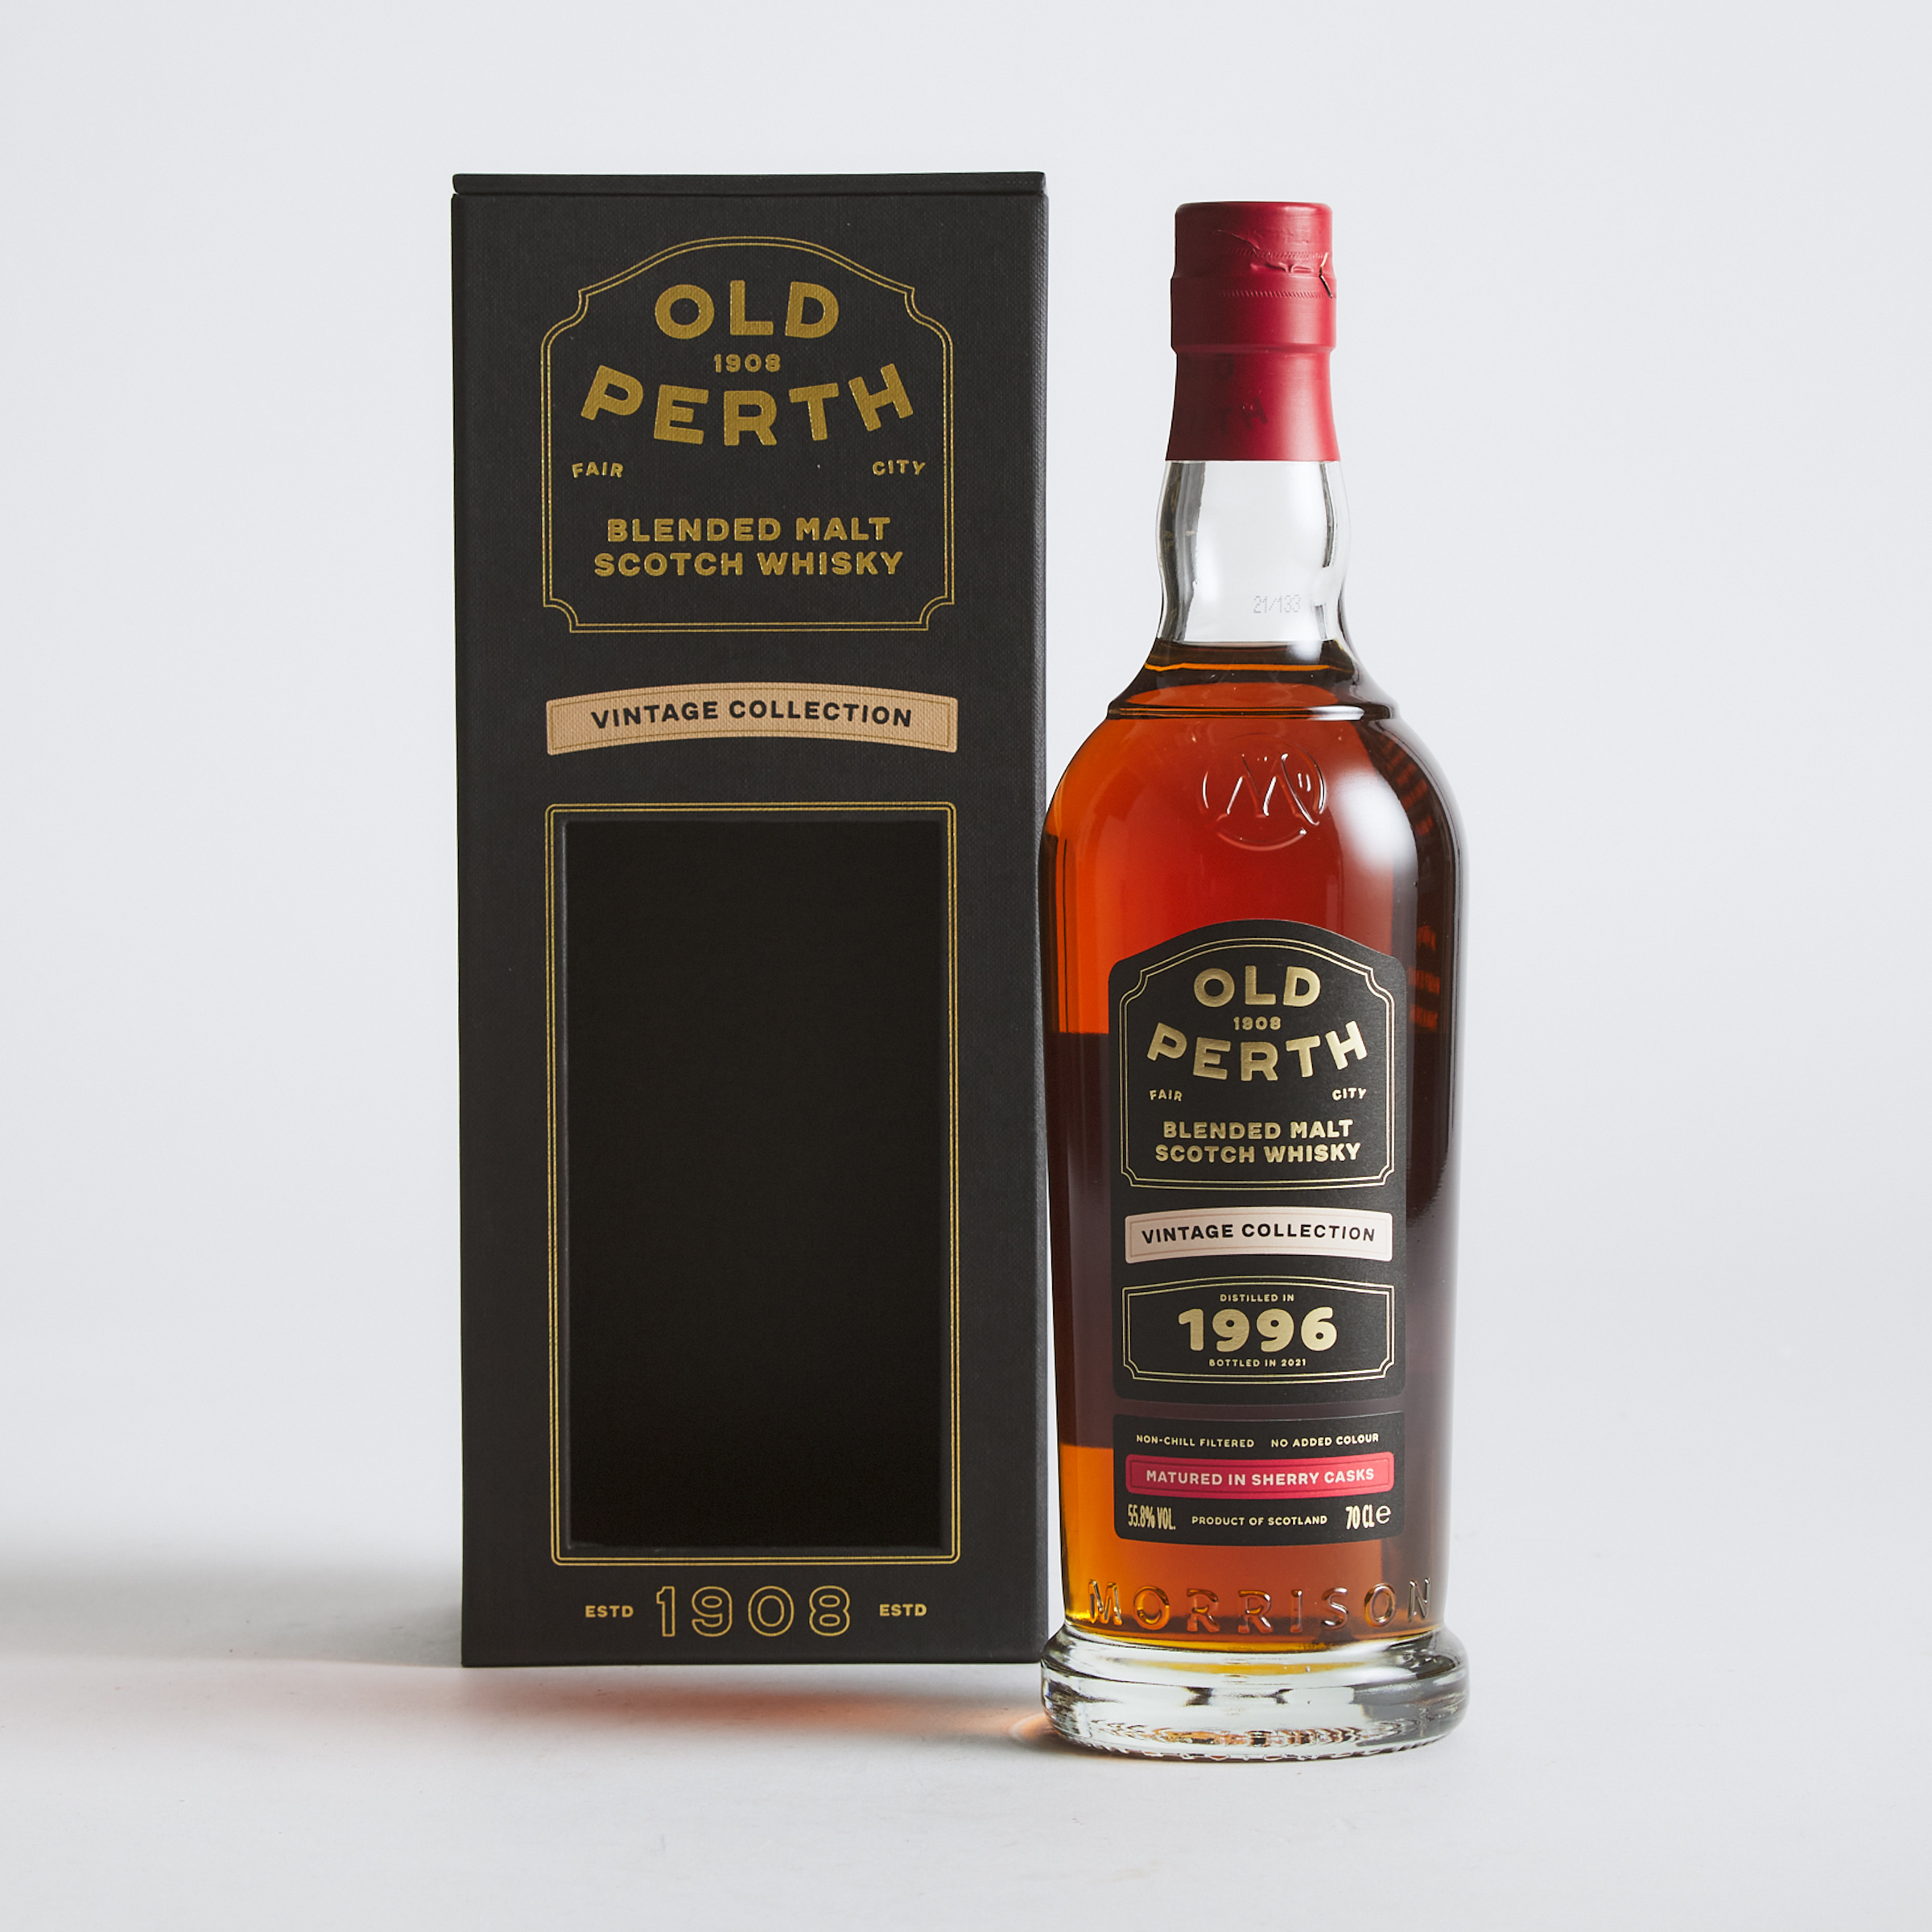 OLD PERTH BLENDED MALT SCOTCH WHISKY NAS (ONE 70 CL)